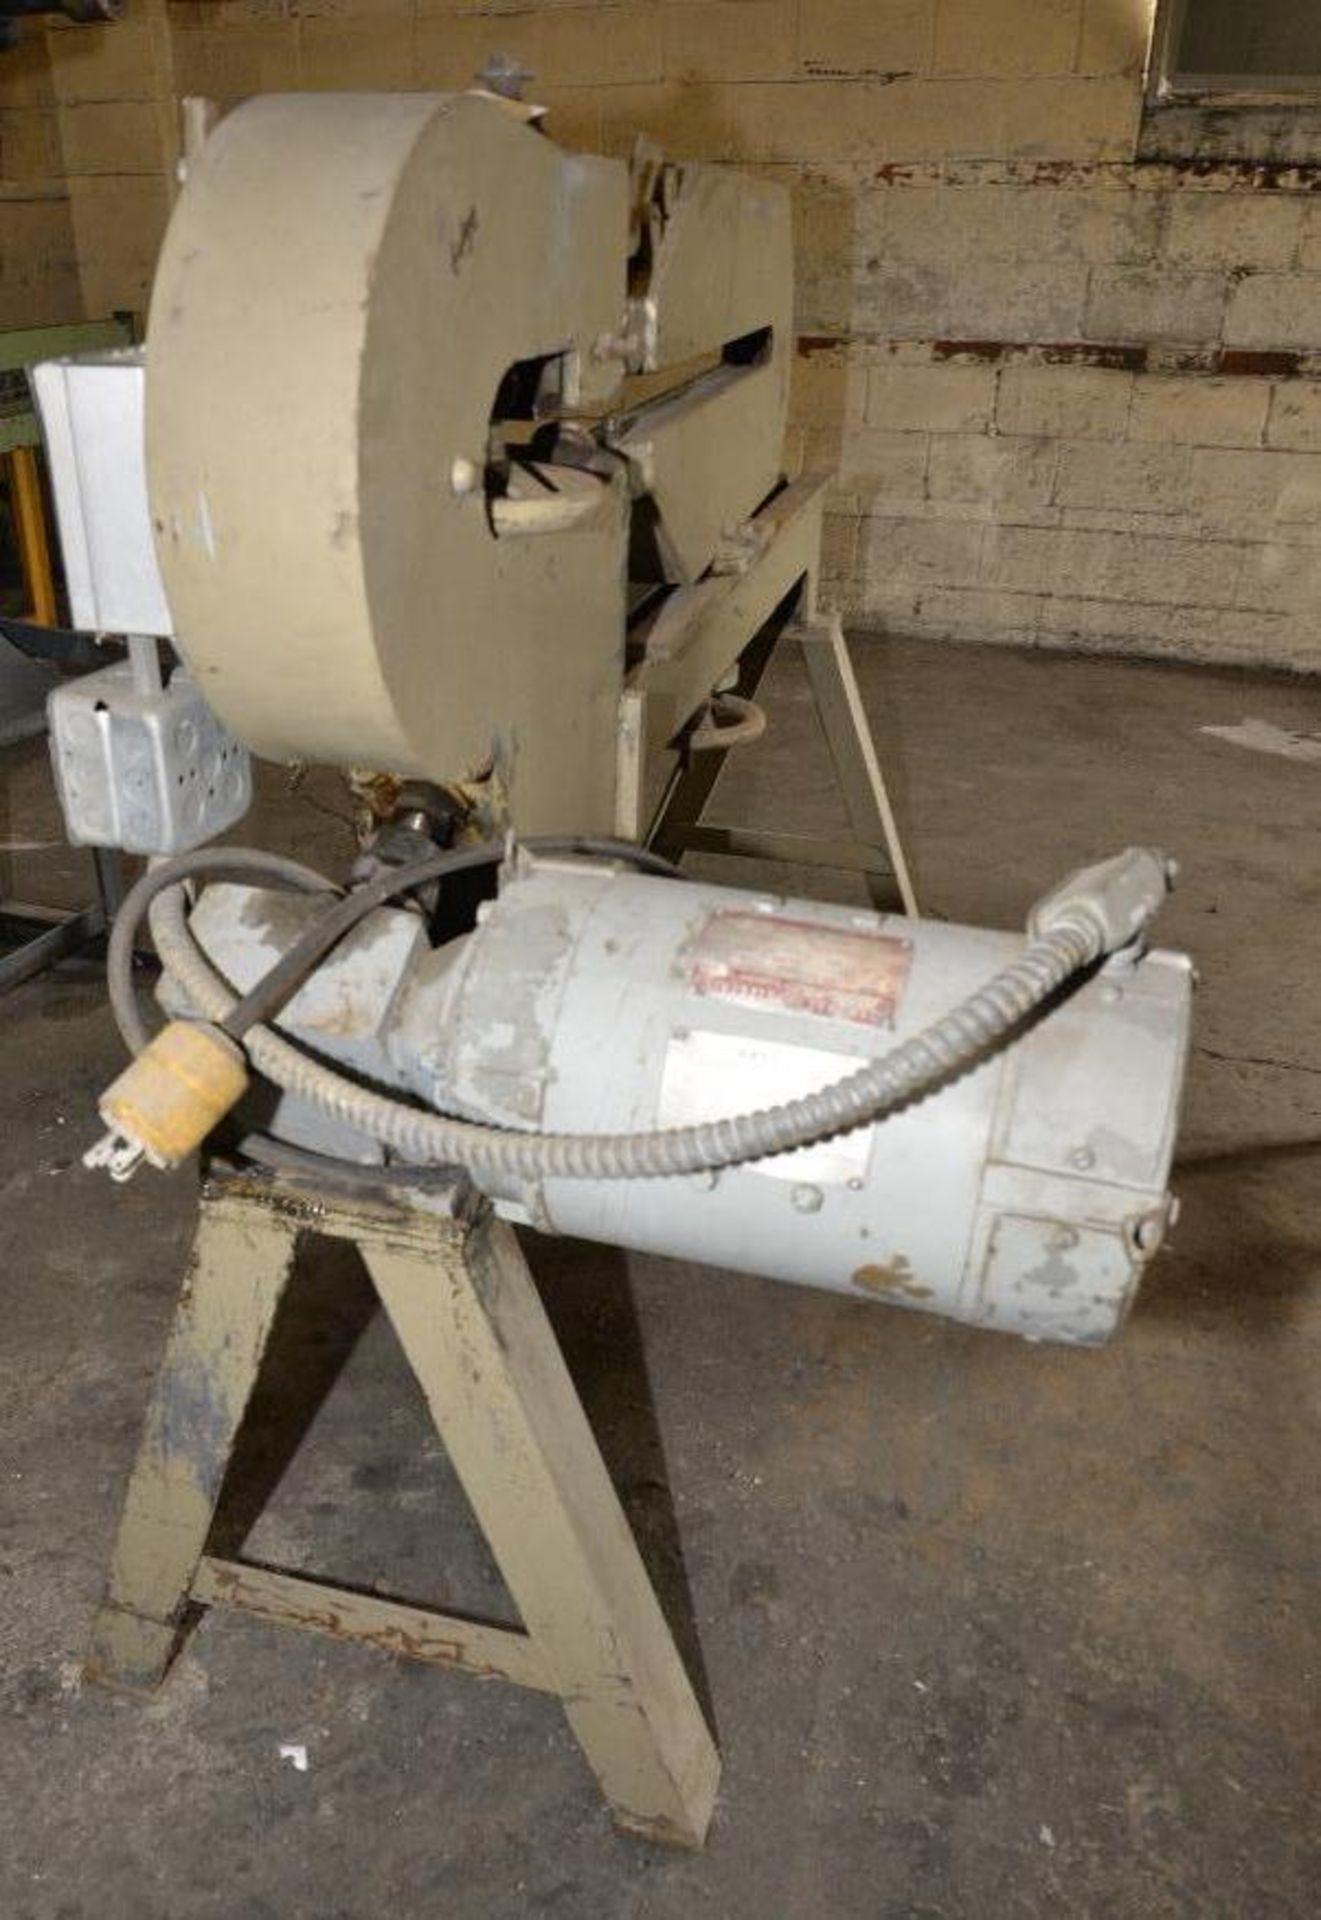 GEORGE TOOL CO. MD. CS5273 CIRCLE CUTTER S/N 027199 - SPINDLE SPEED 4-17 - MAXIUMN SIZE CIRCLE 52" - - Image 5 of 9